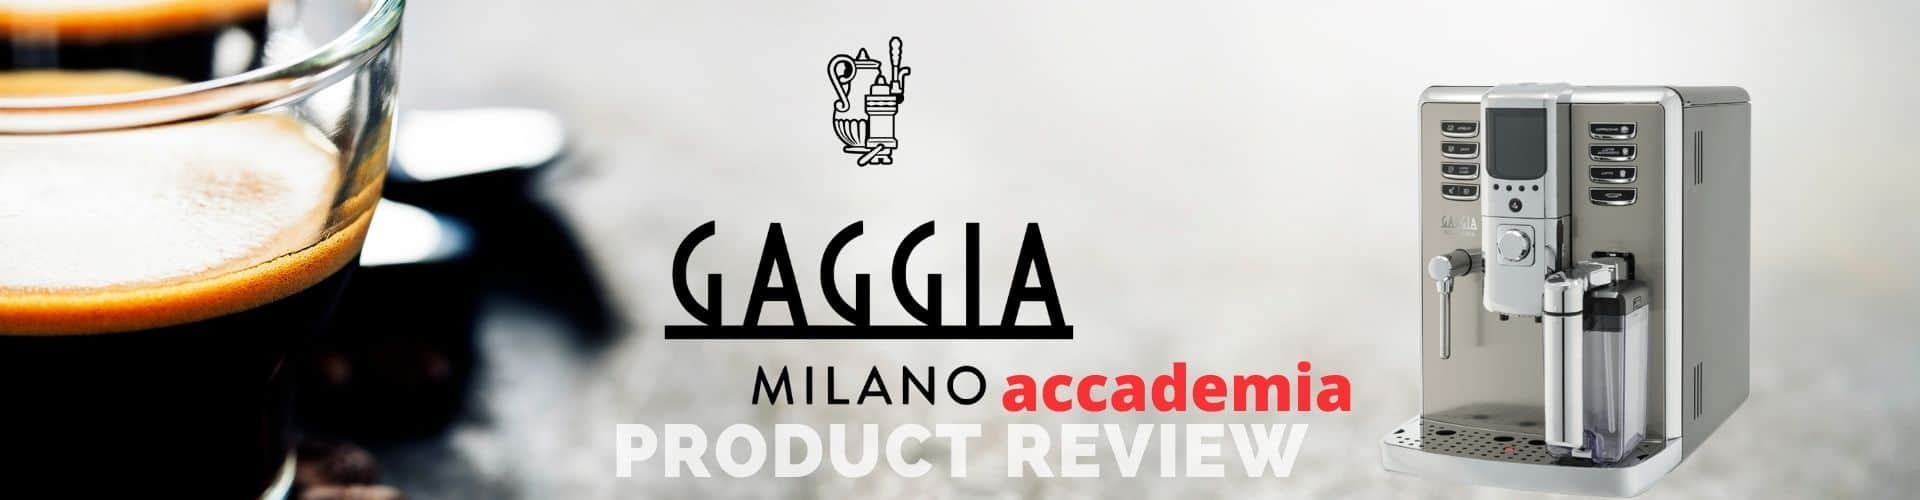 90 Years of Innovation: Gaggia Accademia Espresso Machines